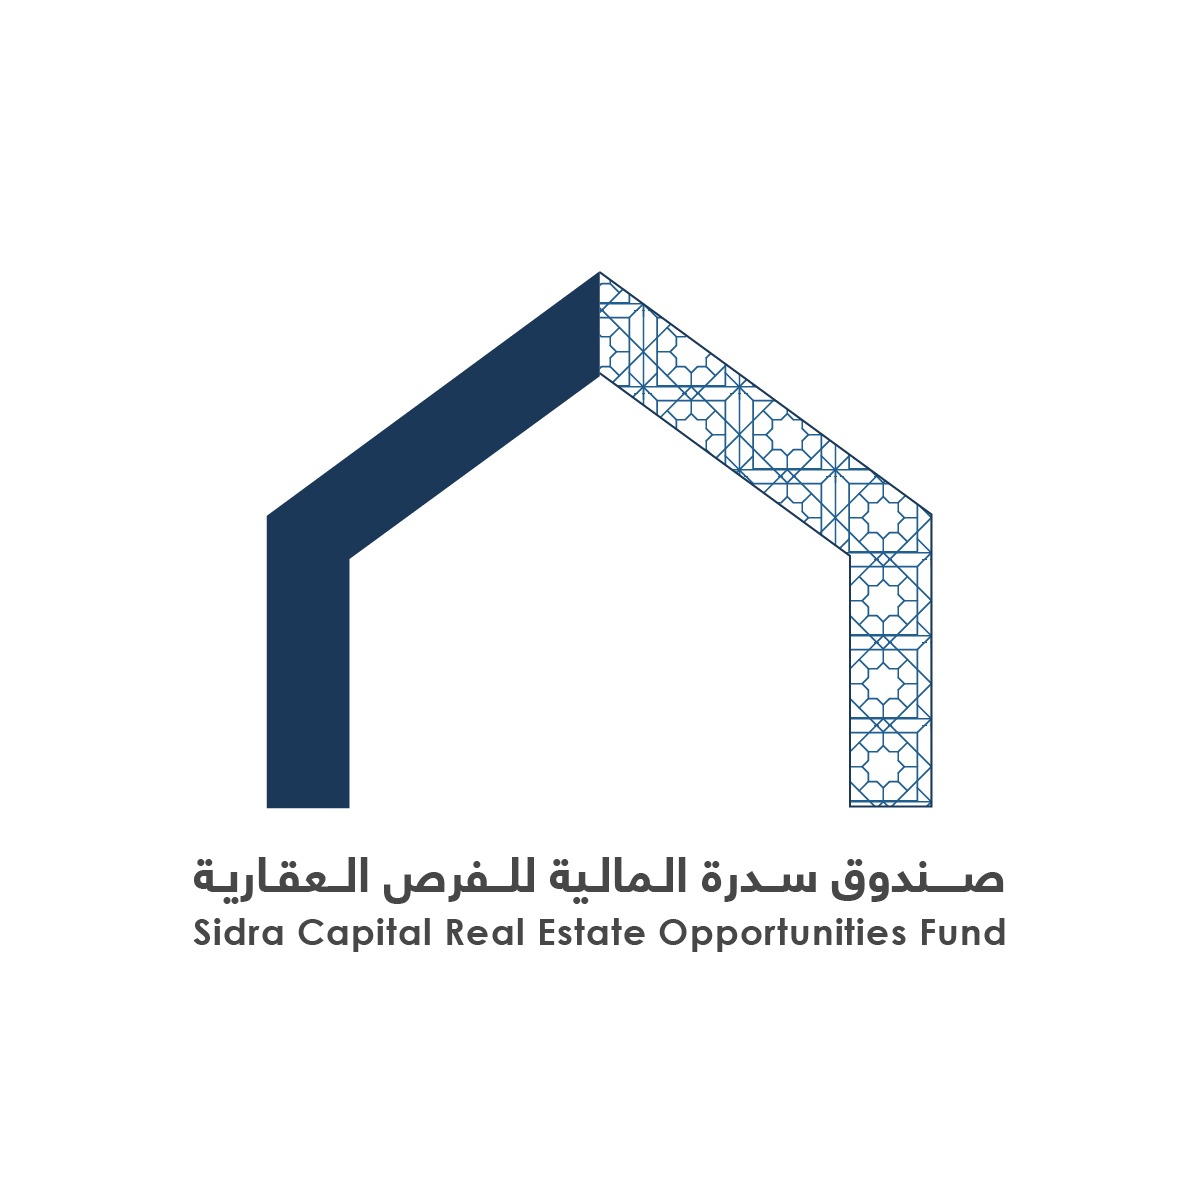 Sidra Capital Real Estate Opportunities Fund